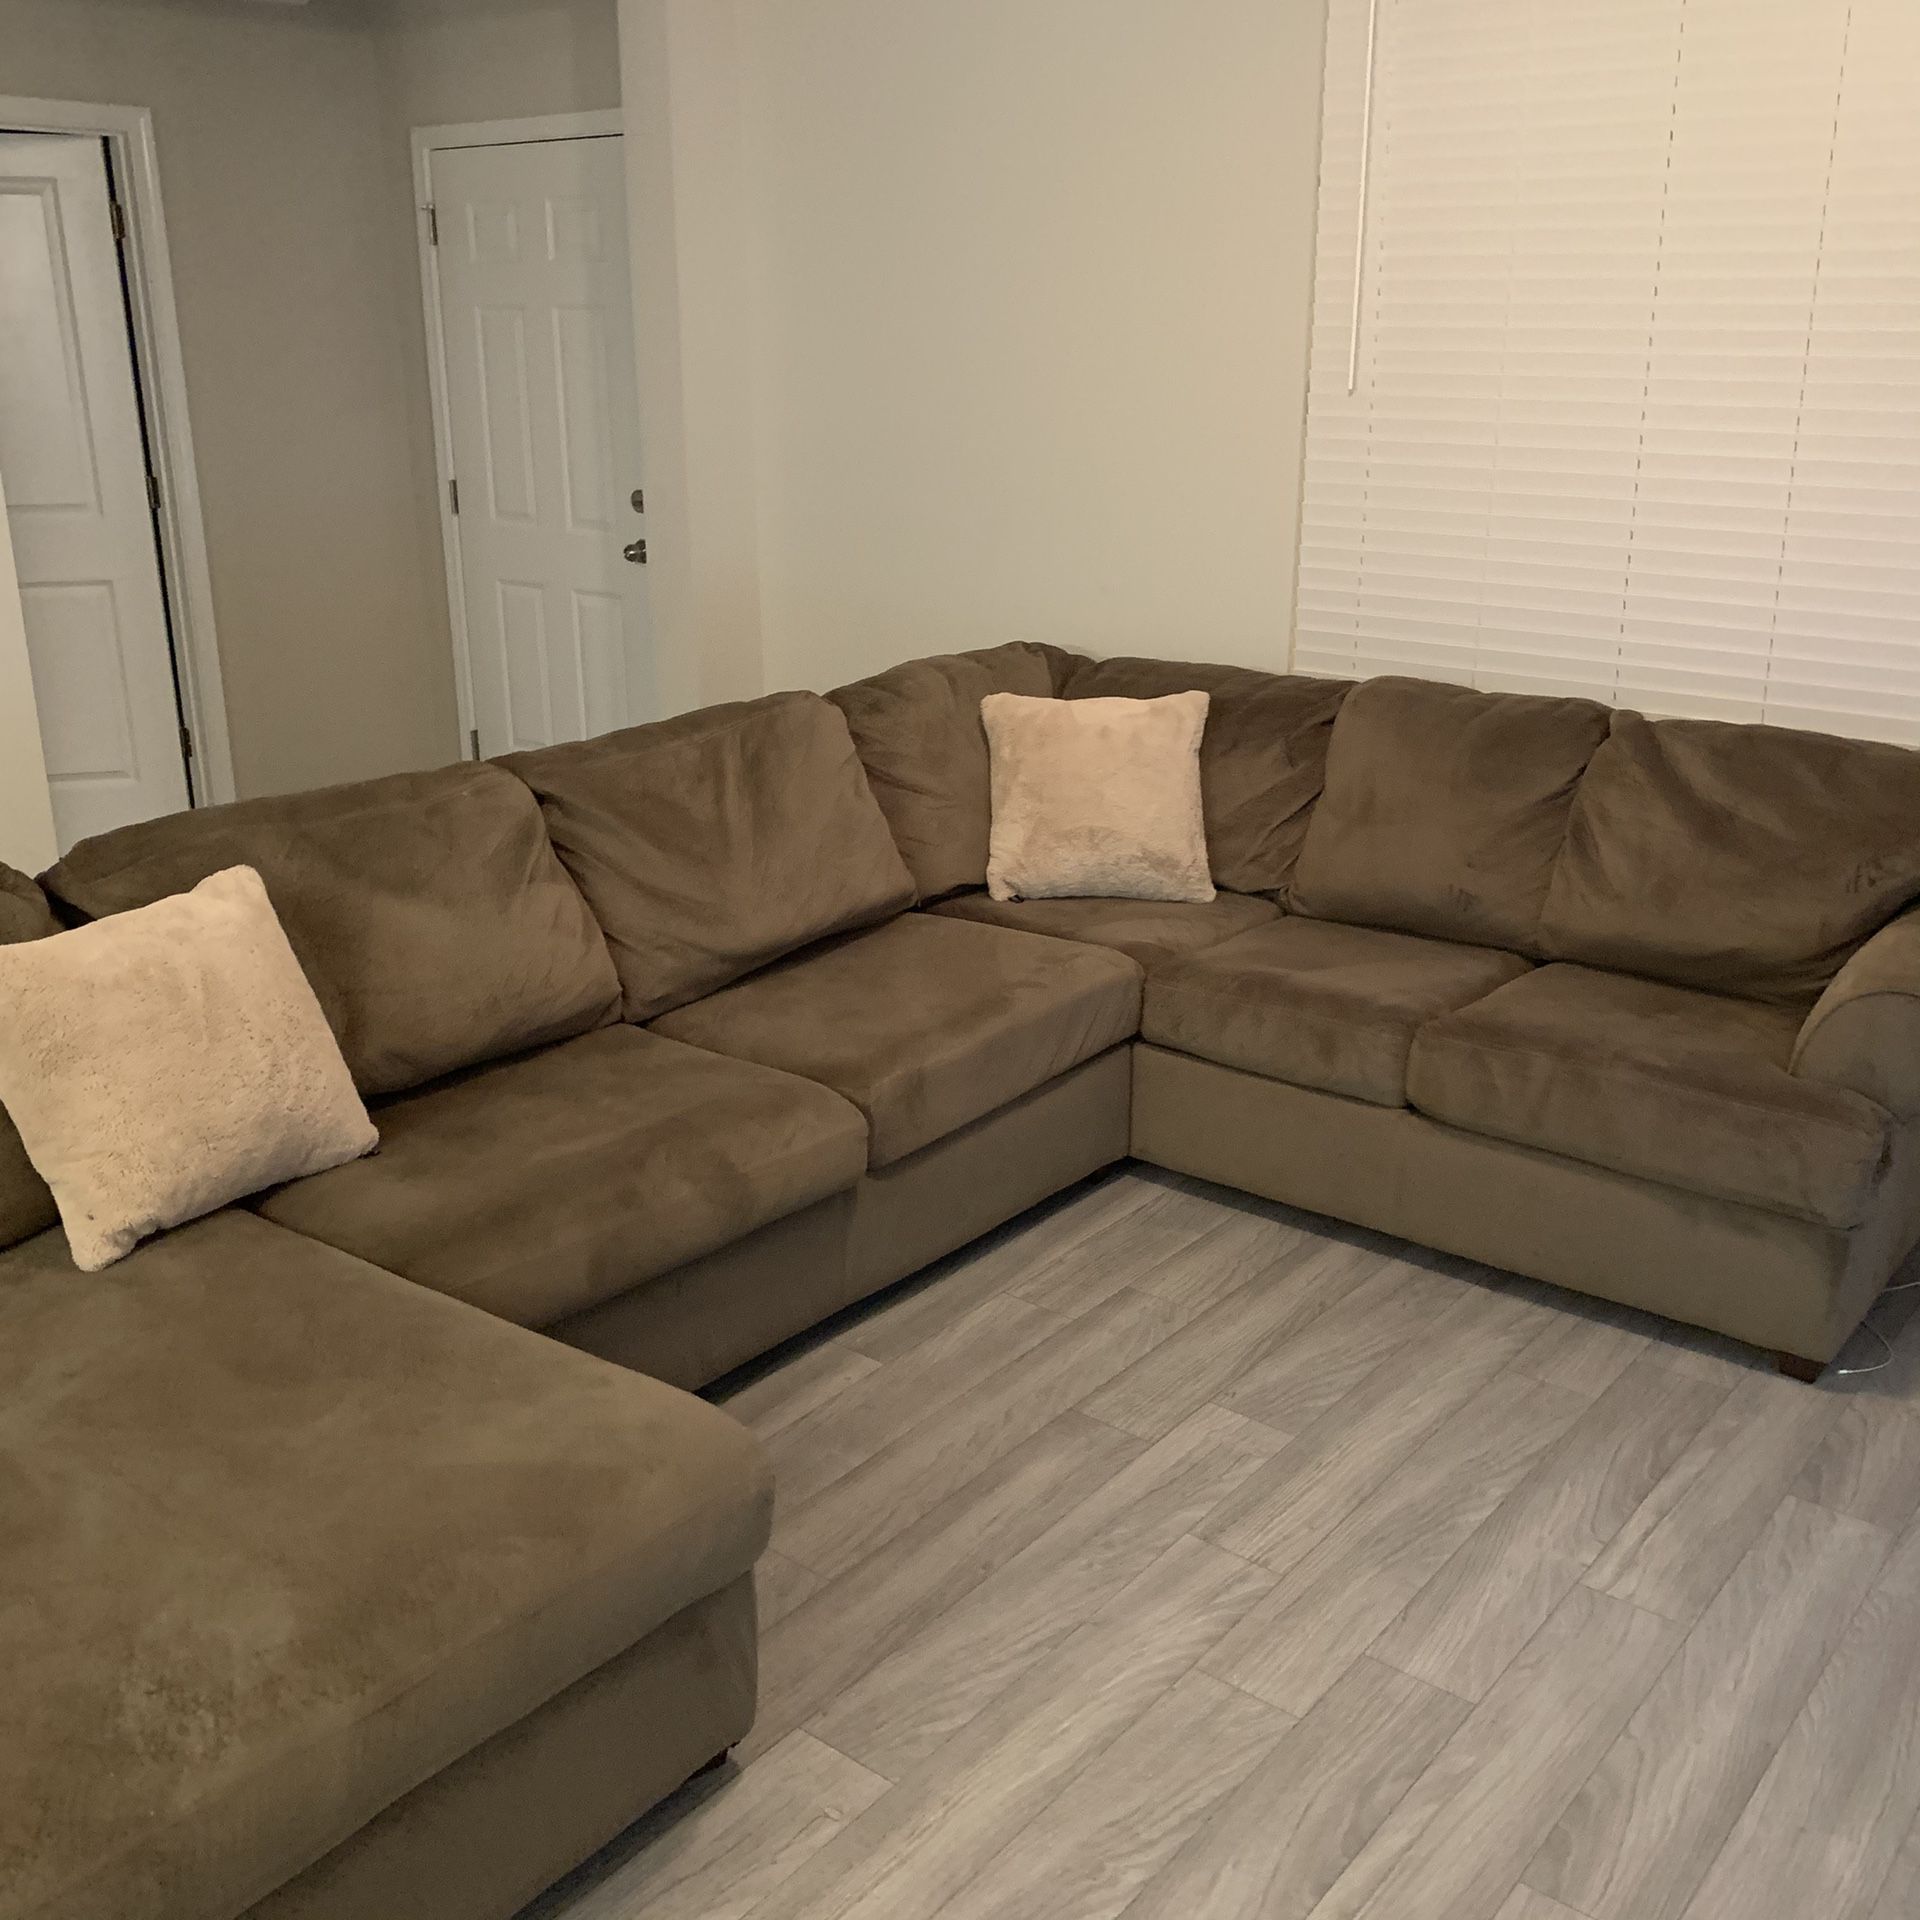 Huge wrap around microfiber couch